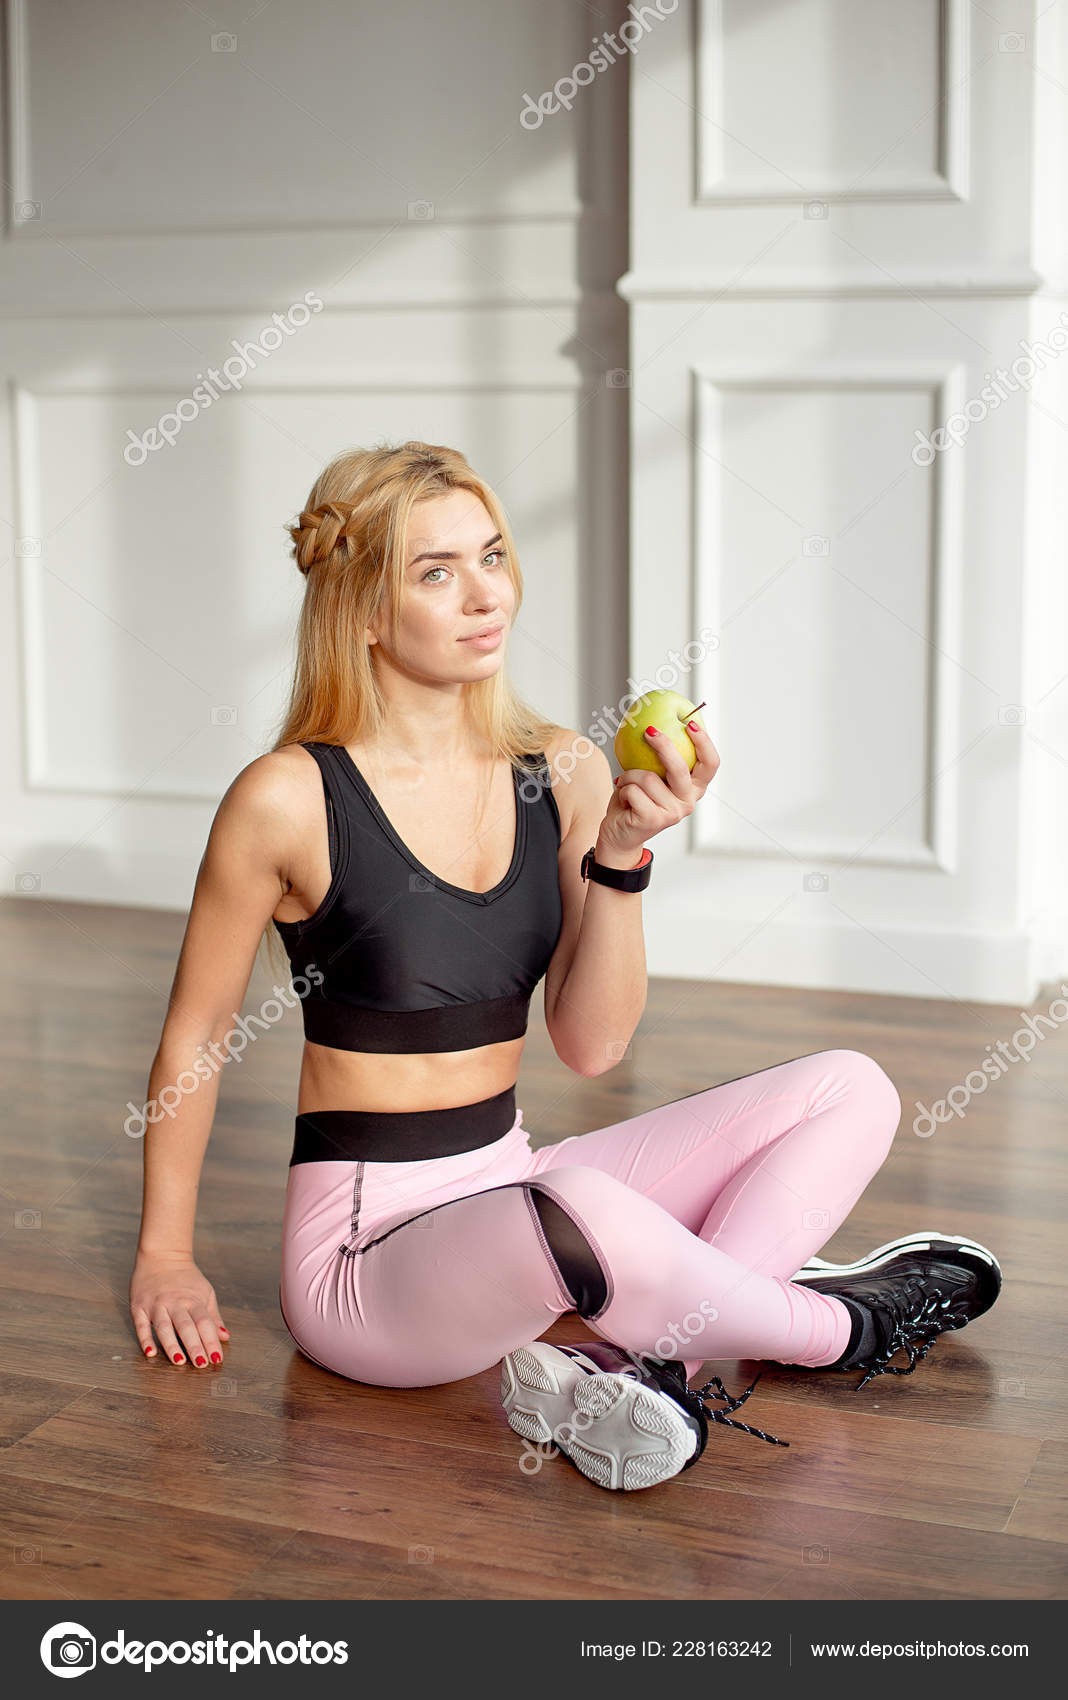 Young Slim Woman with an Athletic Body Blonde Hair Wearing in